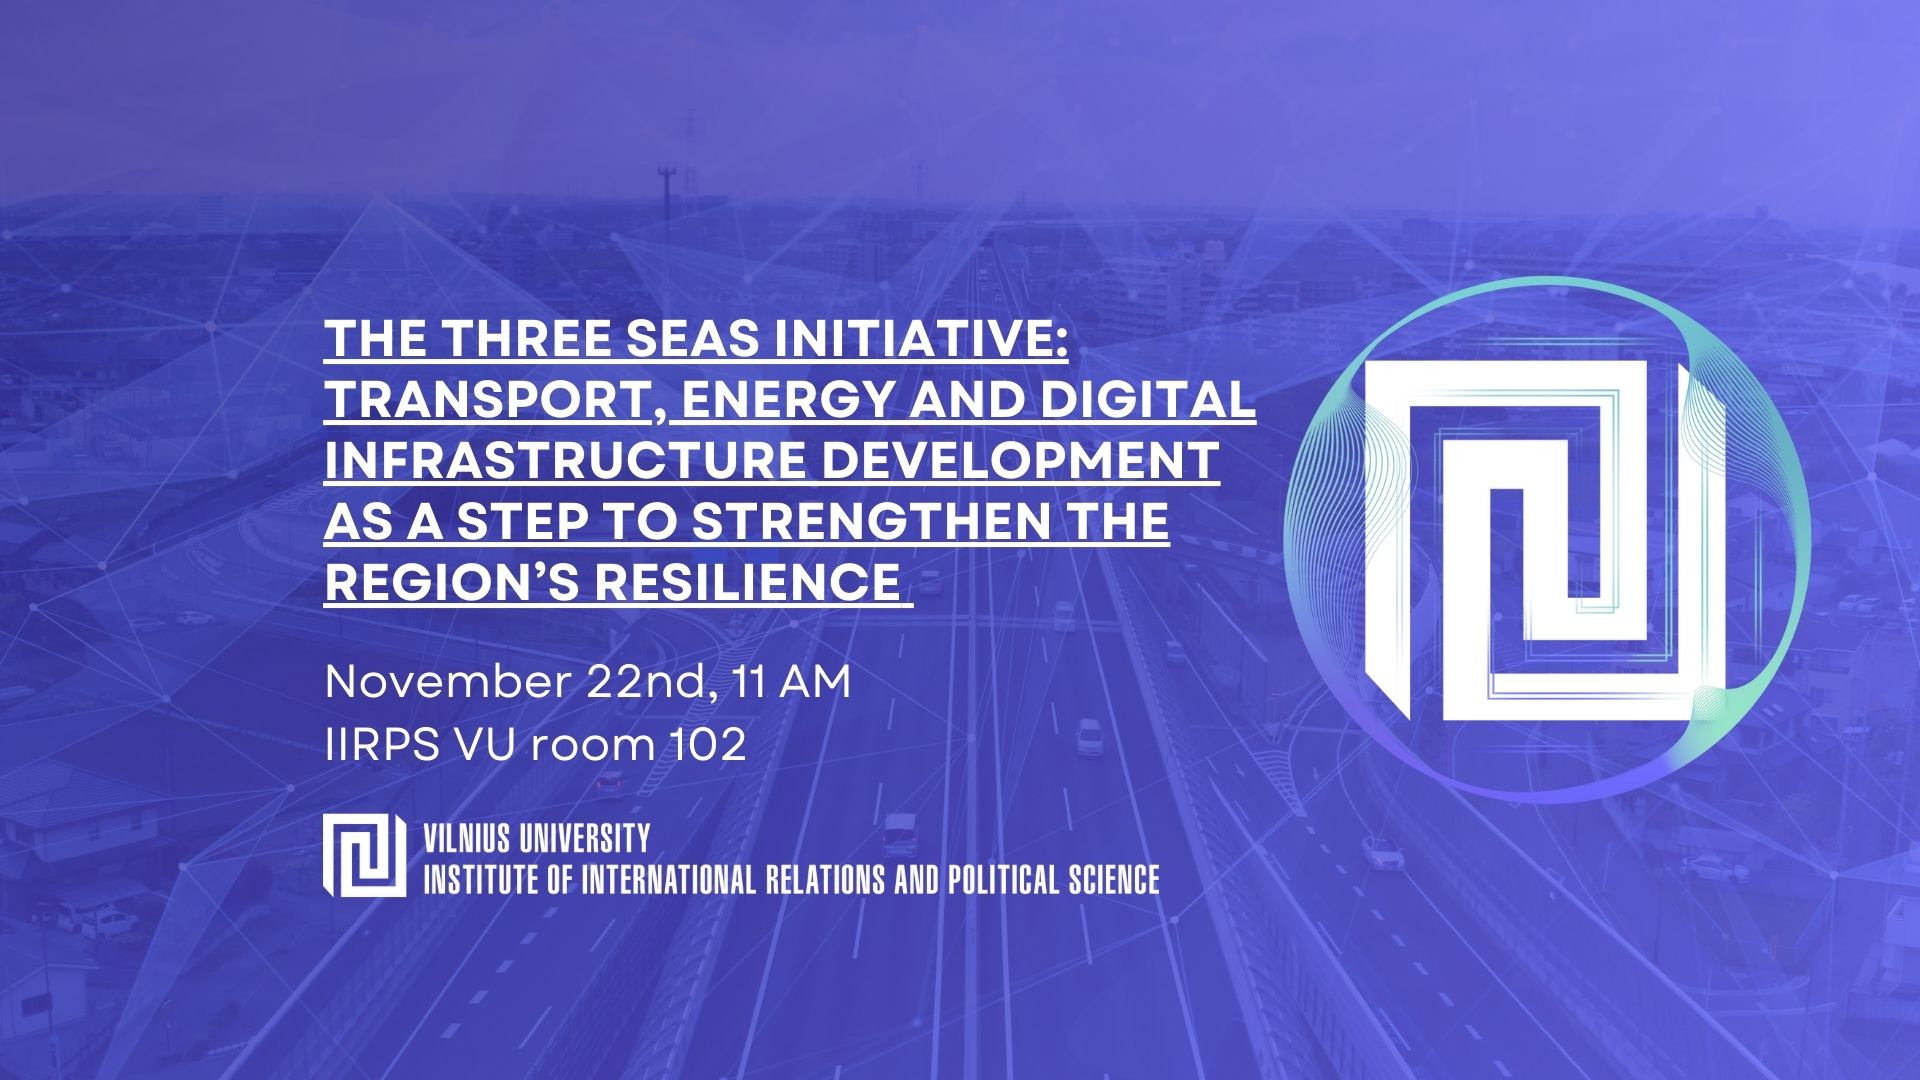 The Three Seas Initiative: Transport, energy and Digital Infrastructure Development as a step to strengthen the region’s resilience